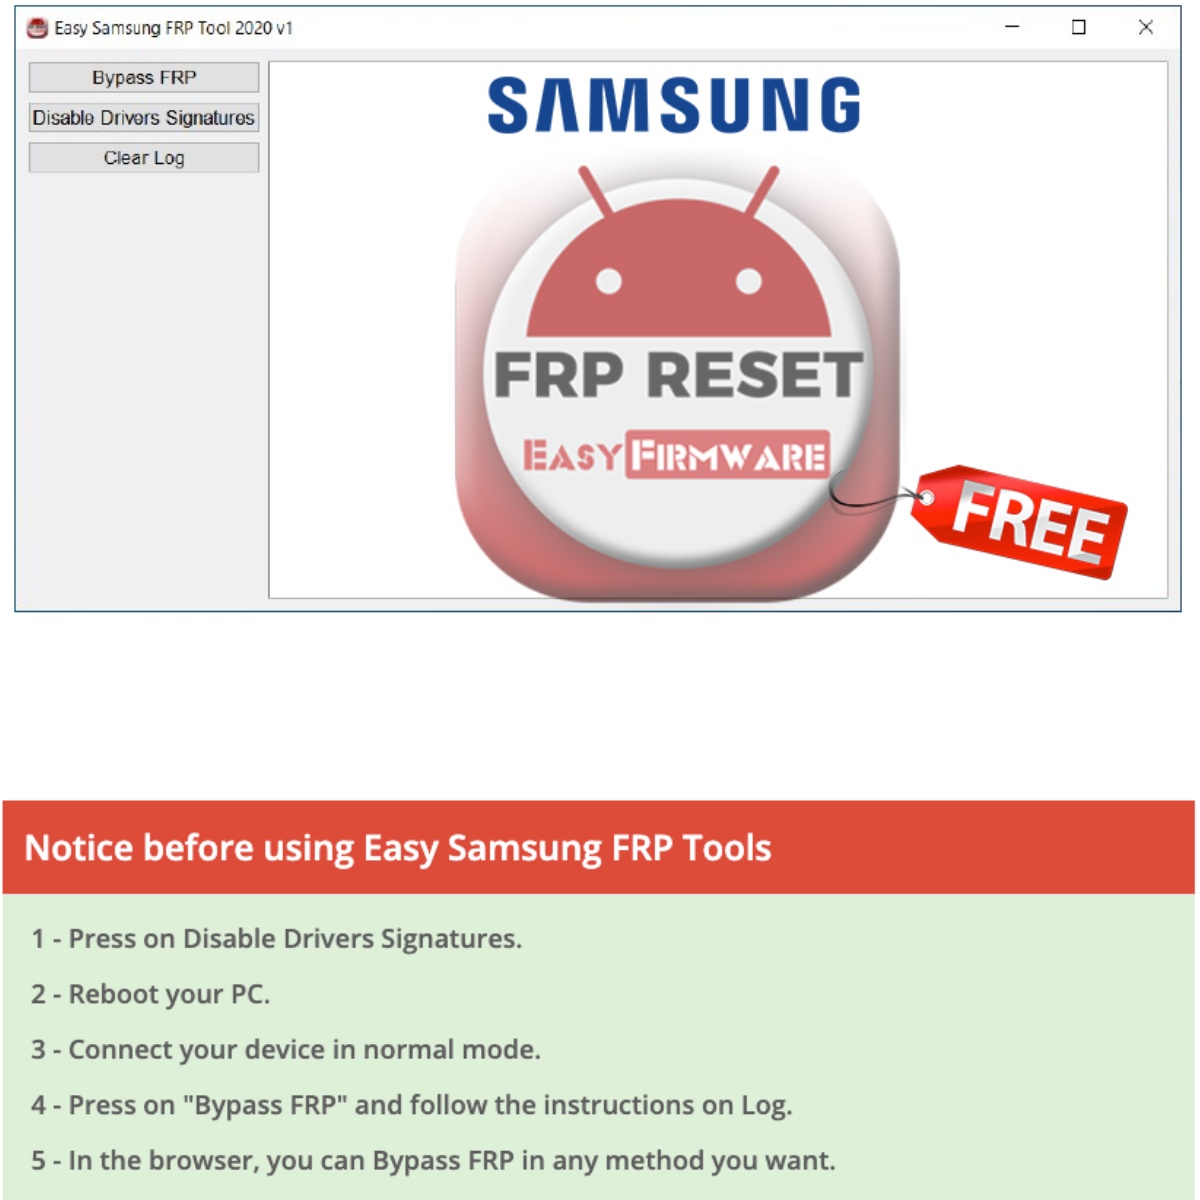 samsung frp tool pro download